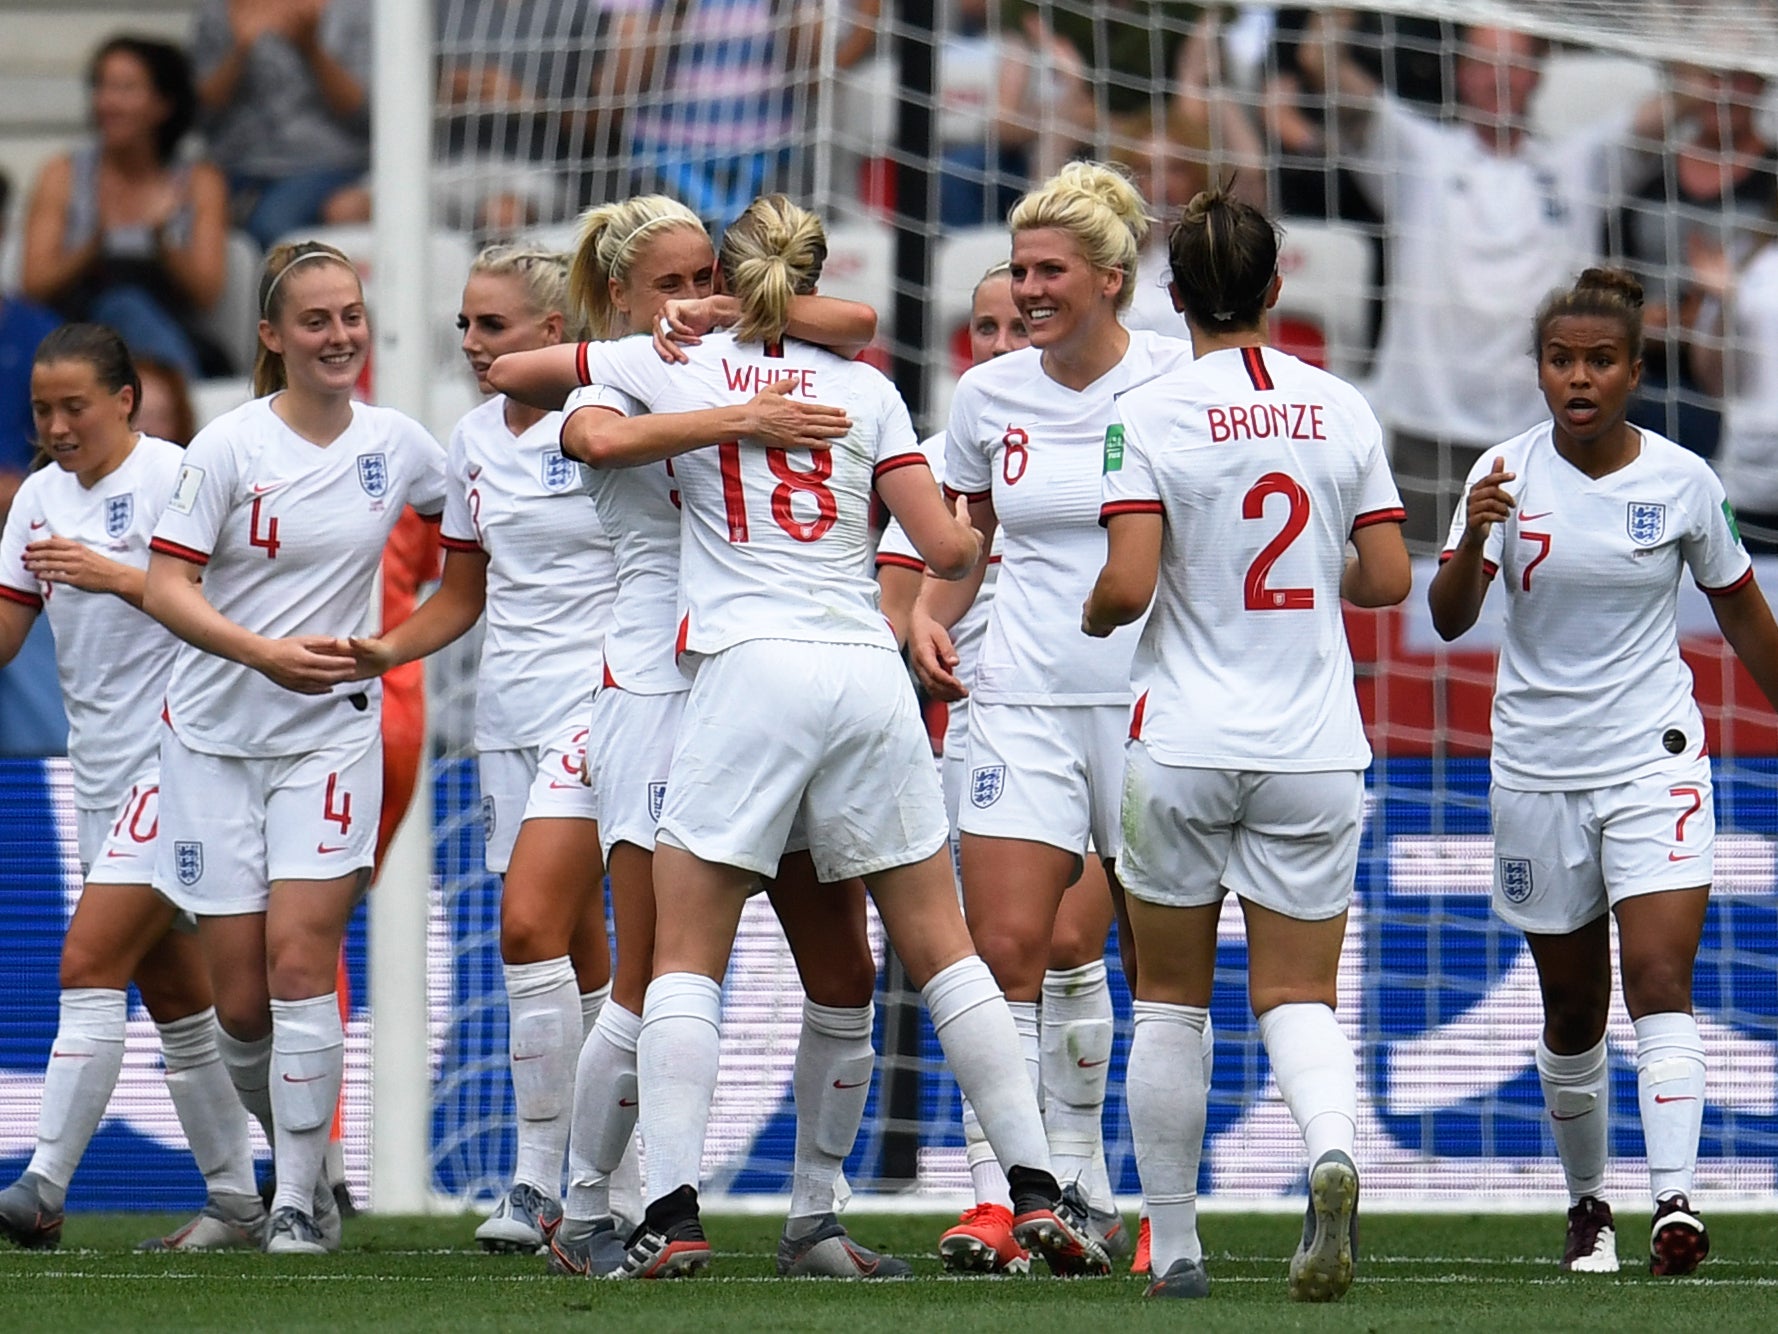 England vs Scotland player ratings: Nikita Parris and Lucy Bronze impress in Lionesses' World Cup opener